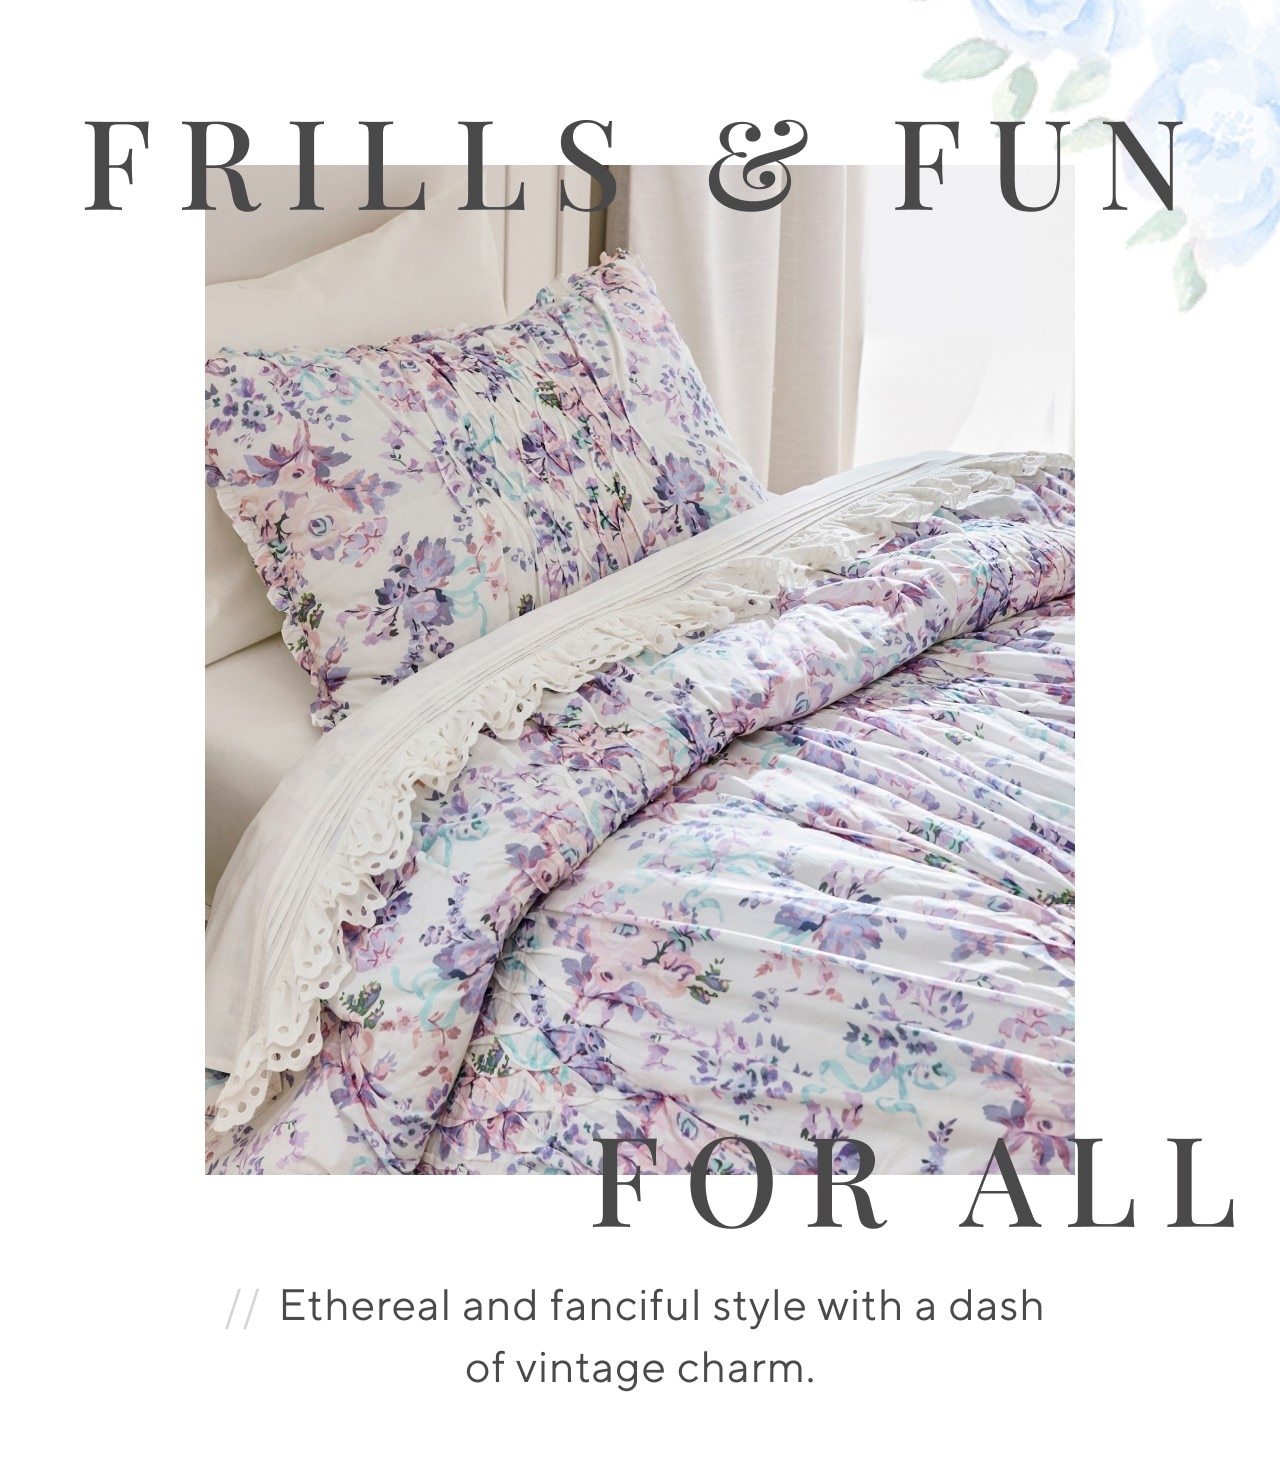 FRILLS & FUN FOR ALL